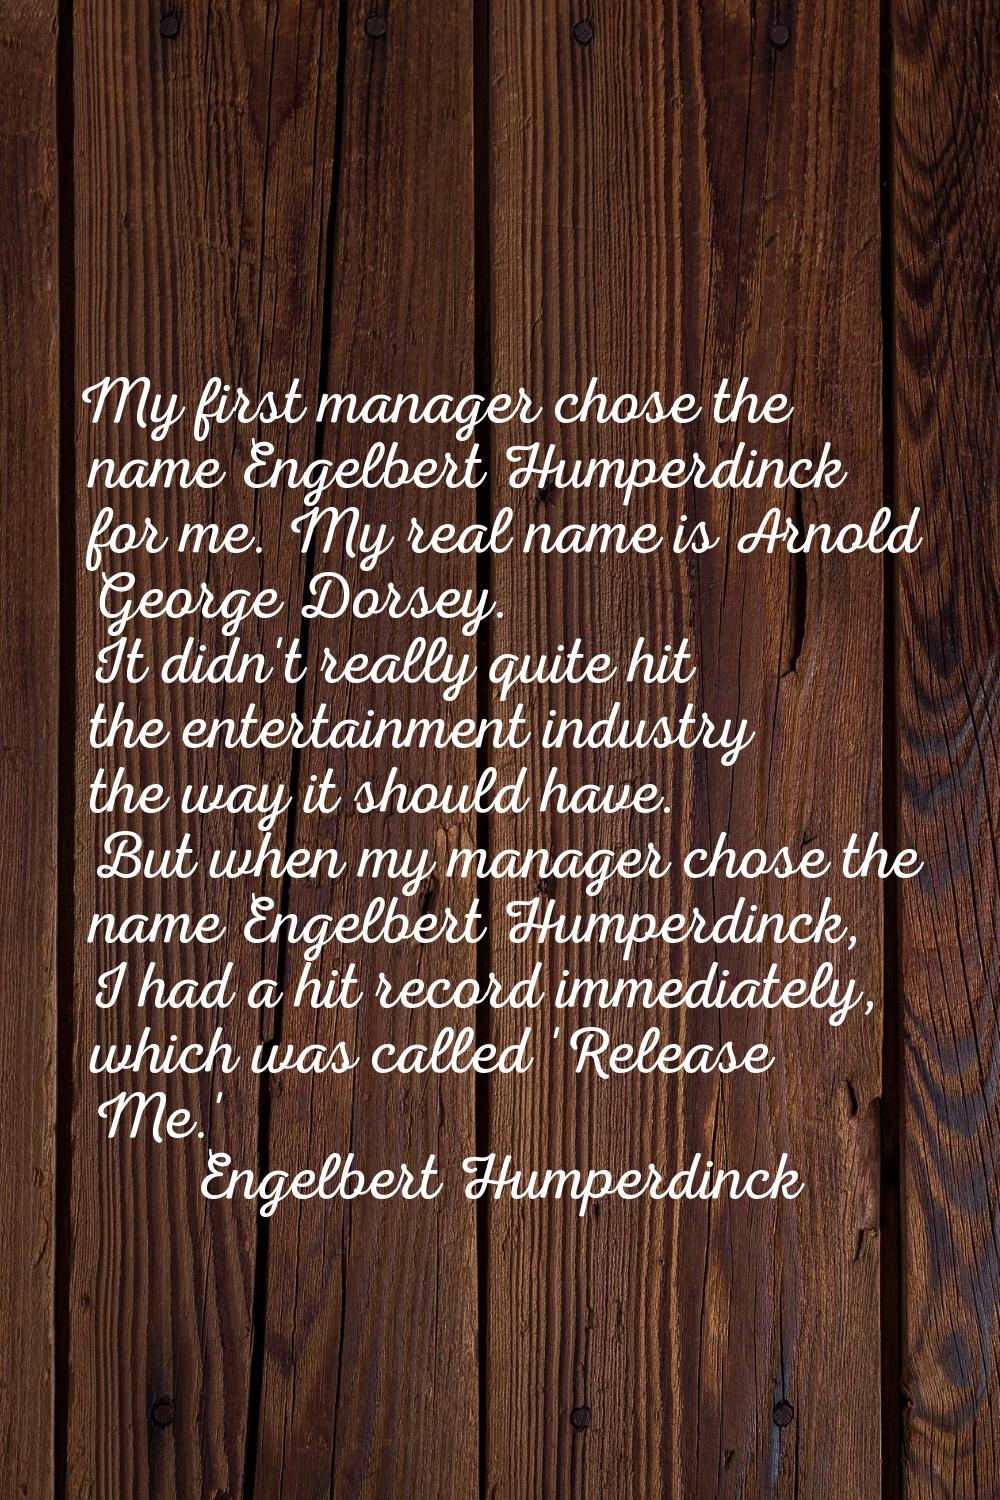 My first manager chose the name Engelbert Humperdinck for me. My real name is Arnold George Dorsey.